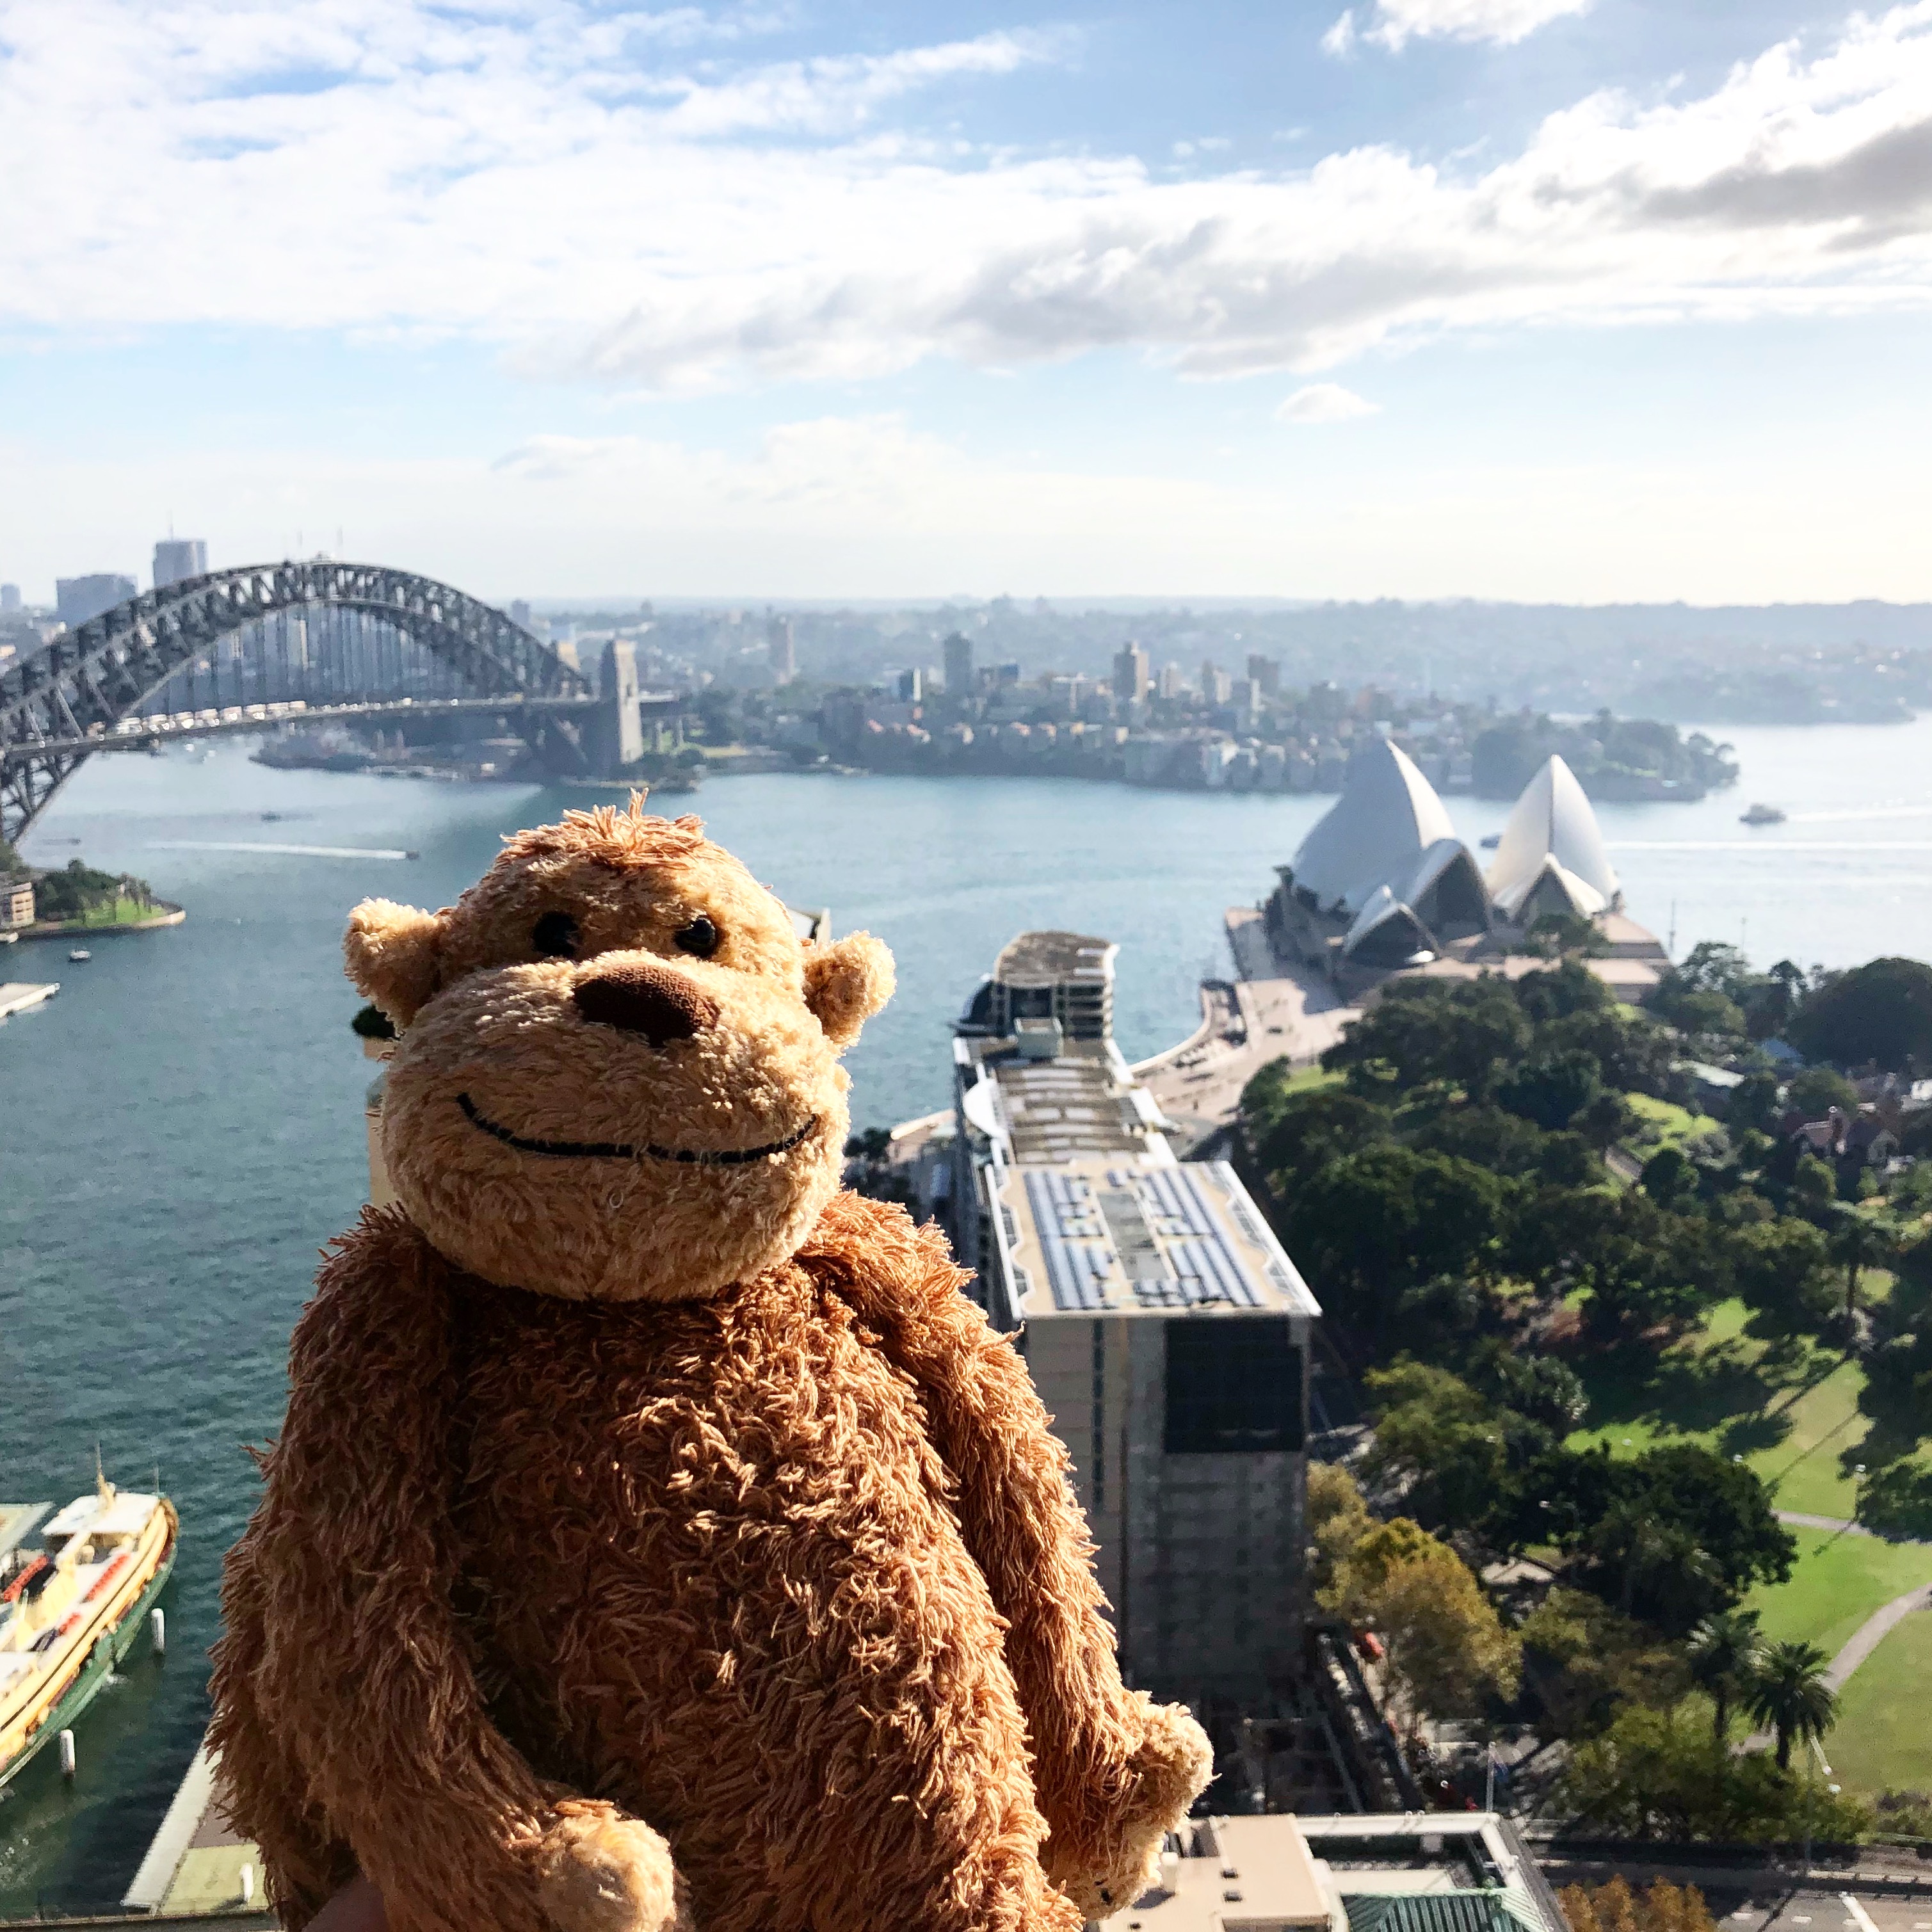 a stuffed animal standing on a ledge overlooking a city